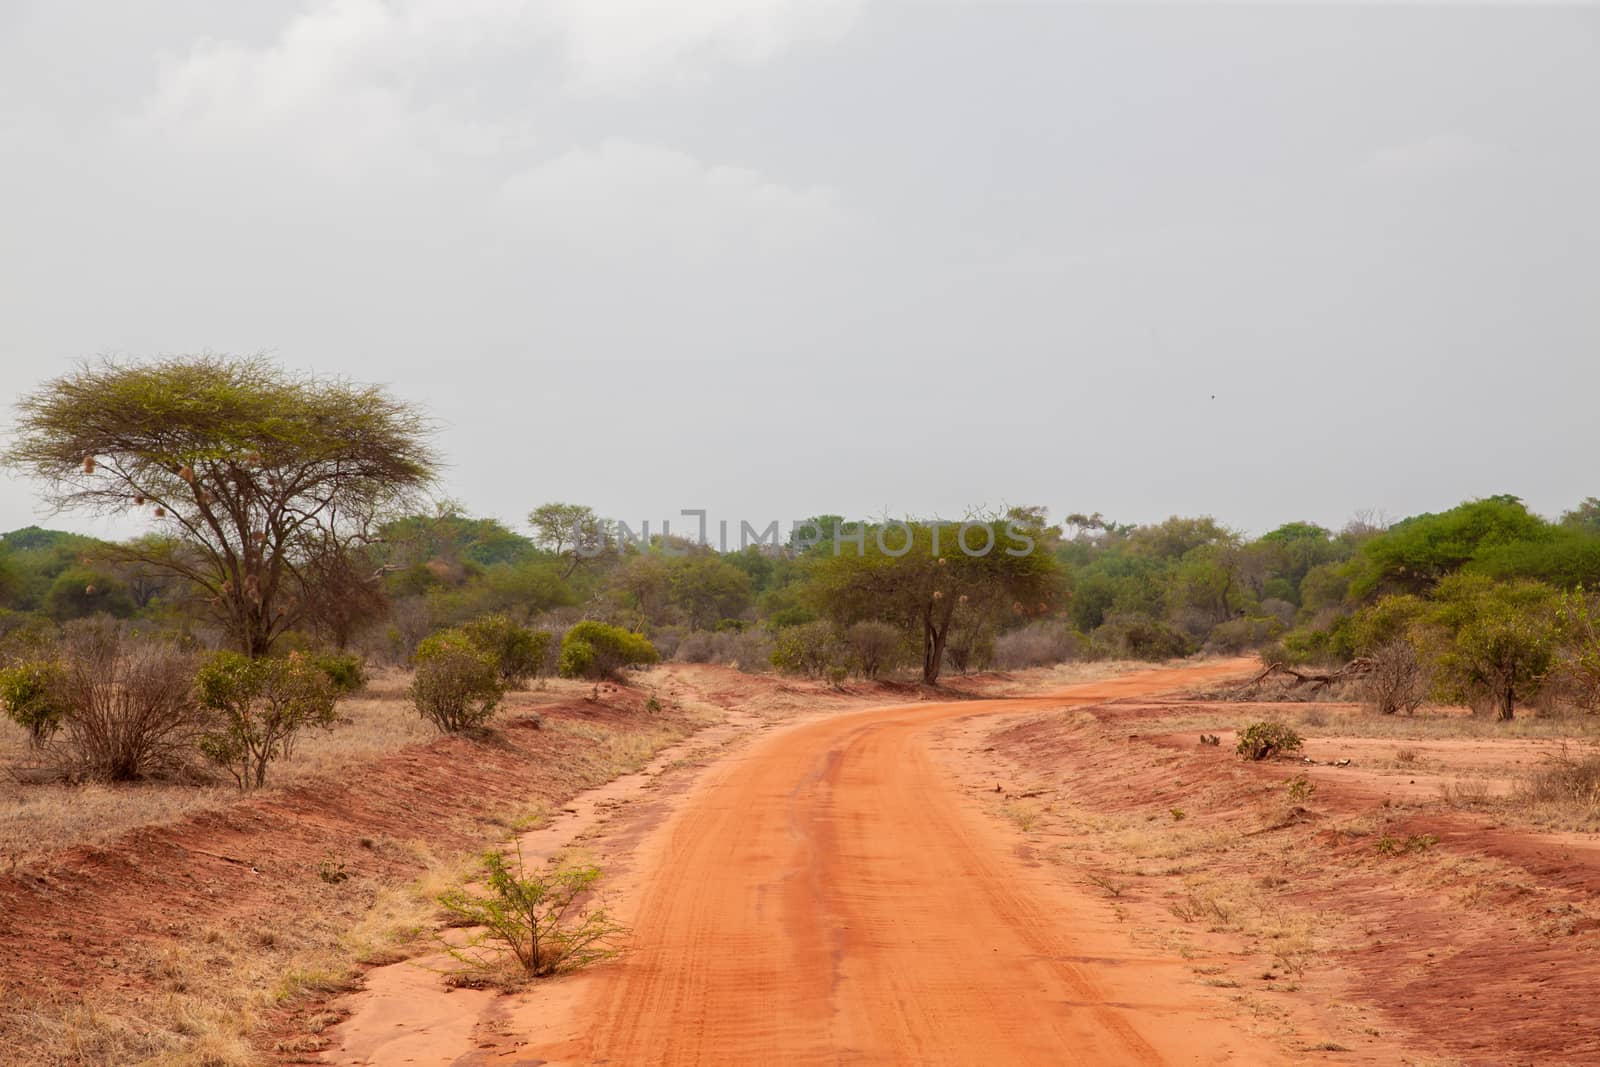 Landscape with red soil, on safari in Kenya by 25ehaag6